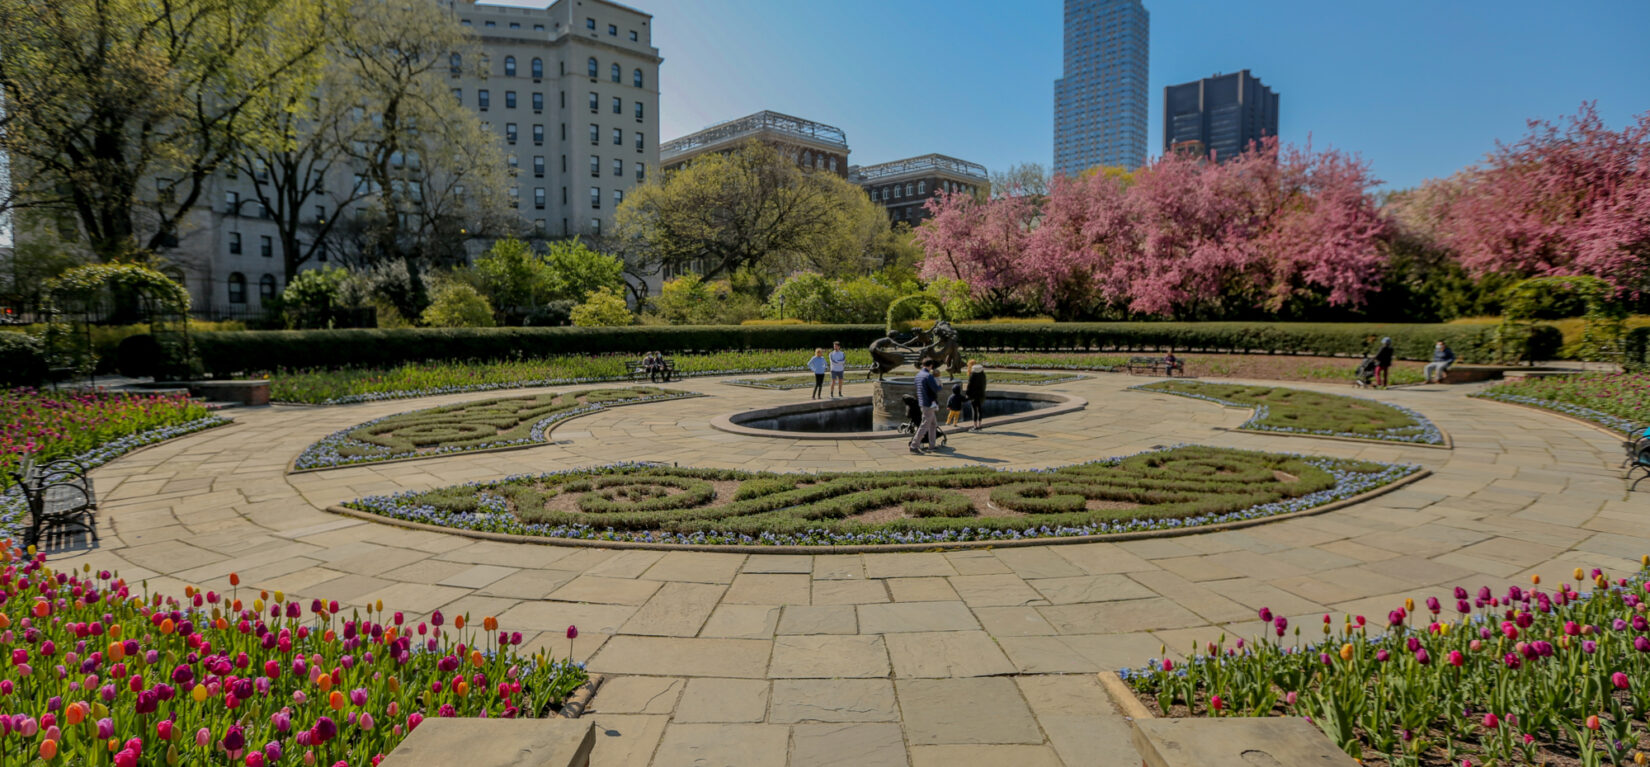 Conservatory Garden - Central Park NYC